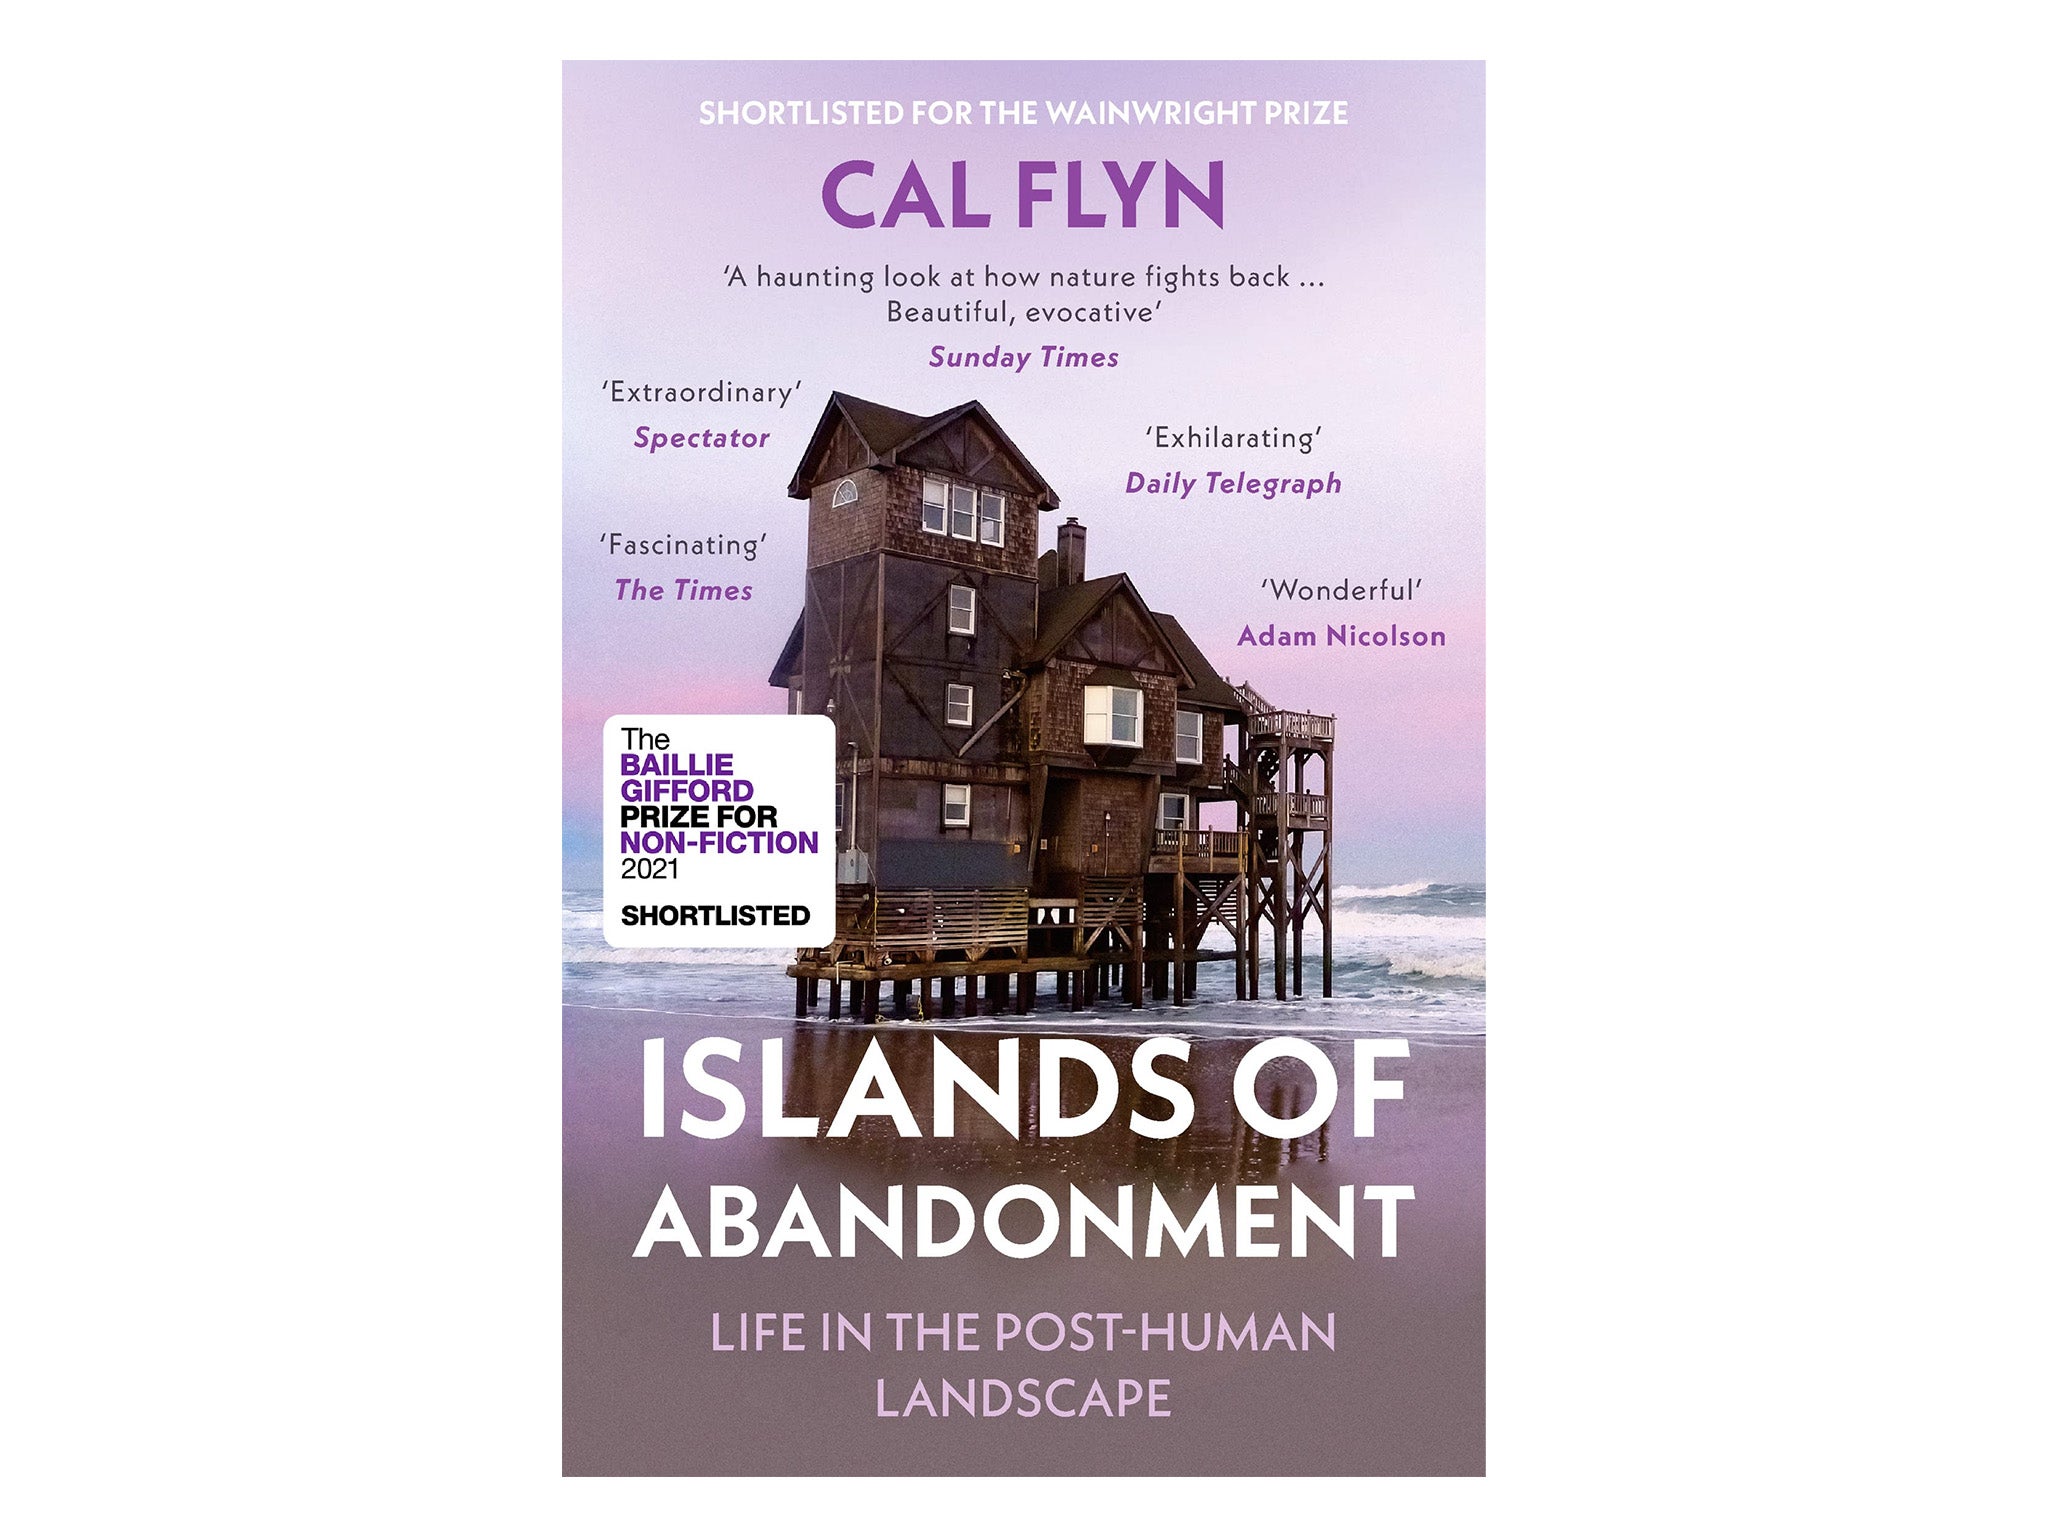  Islands of Abandonment- Life in the Post-Human Landscape.jpg